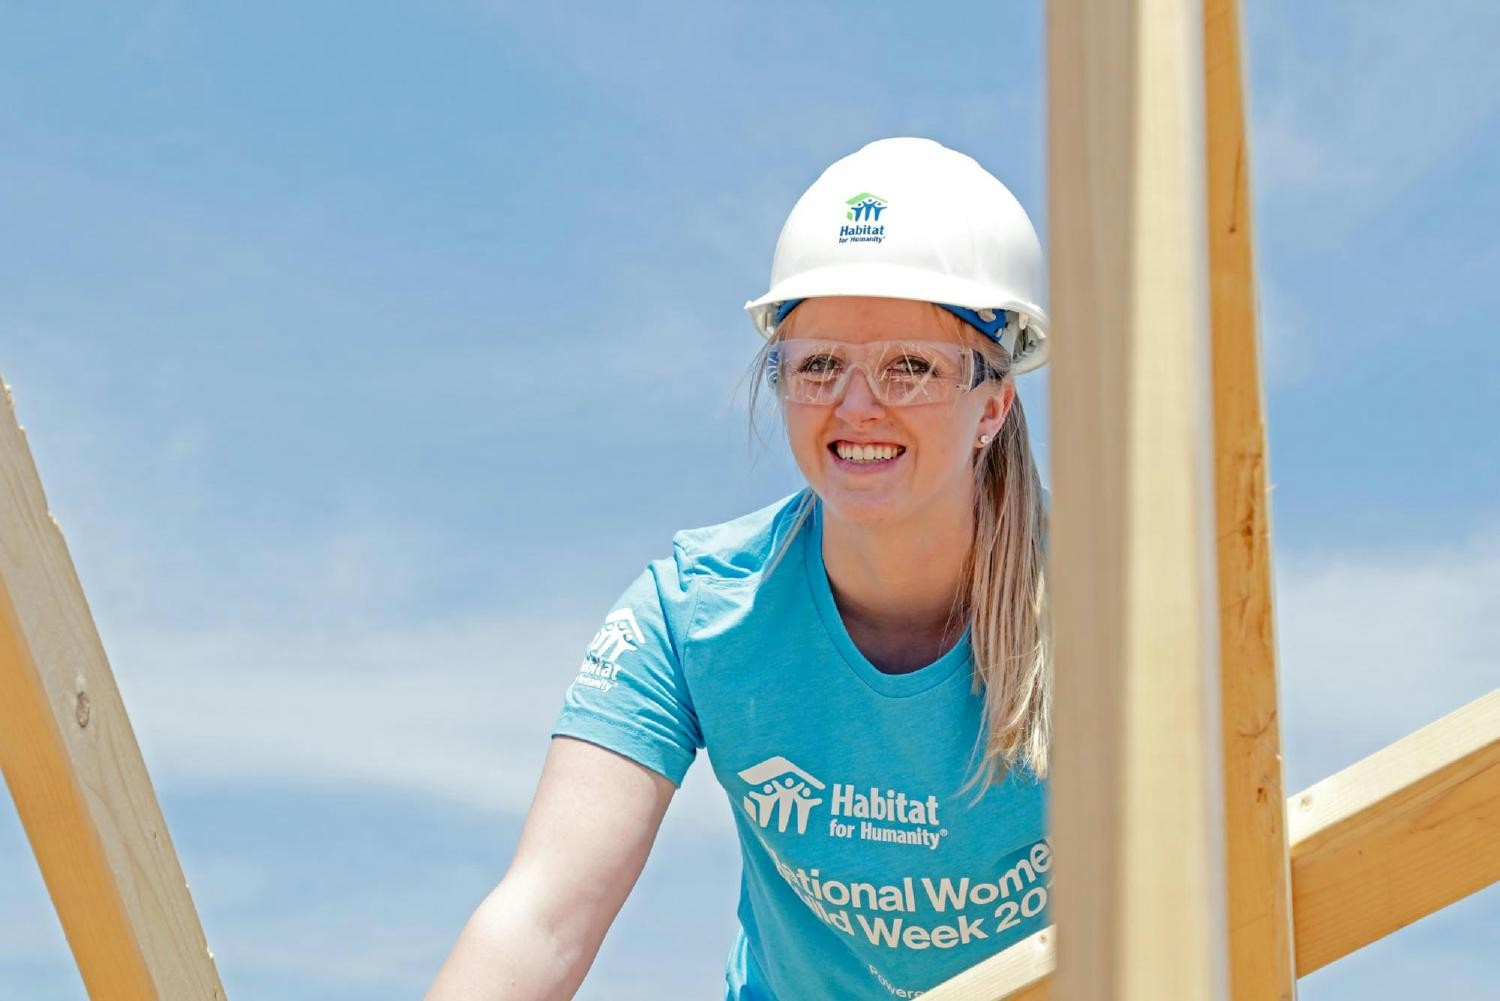 Our employees get paid time to volunteer and support a variety of organizations, like Habitat for Humanity.